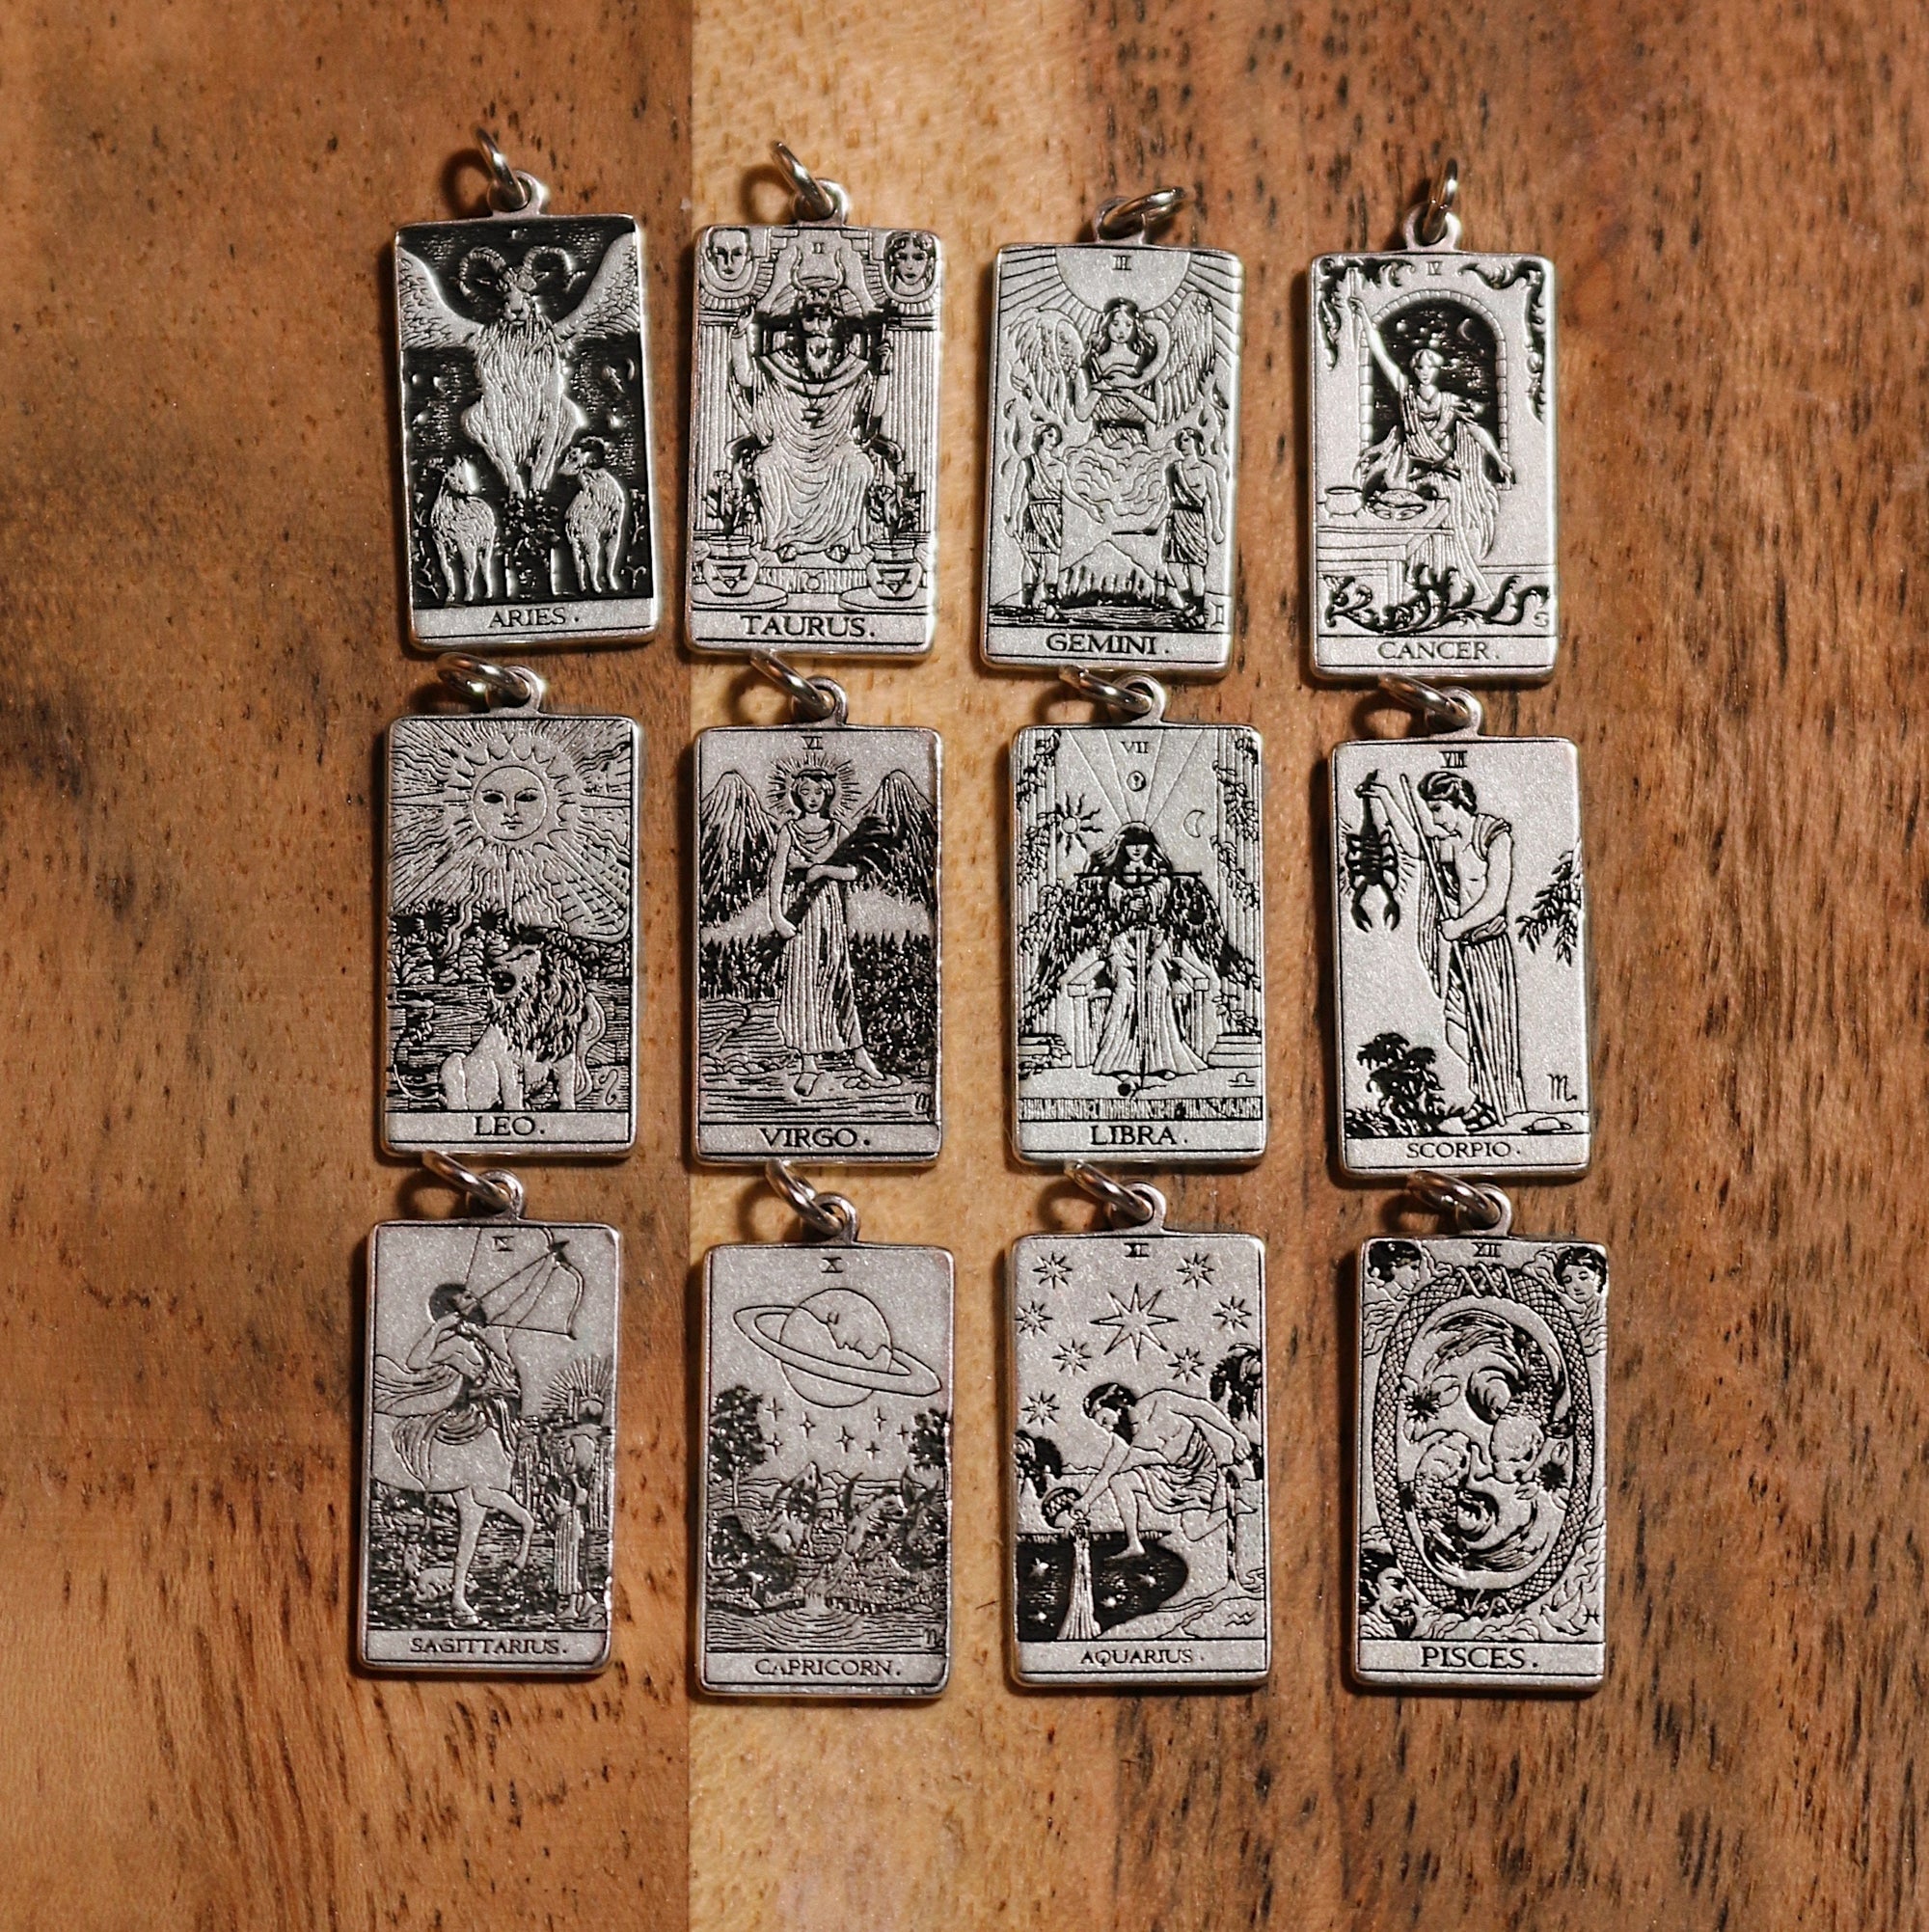 Leo The Sun Tarot Card Inspired Zodiac Necklace - Sterling Silver